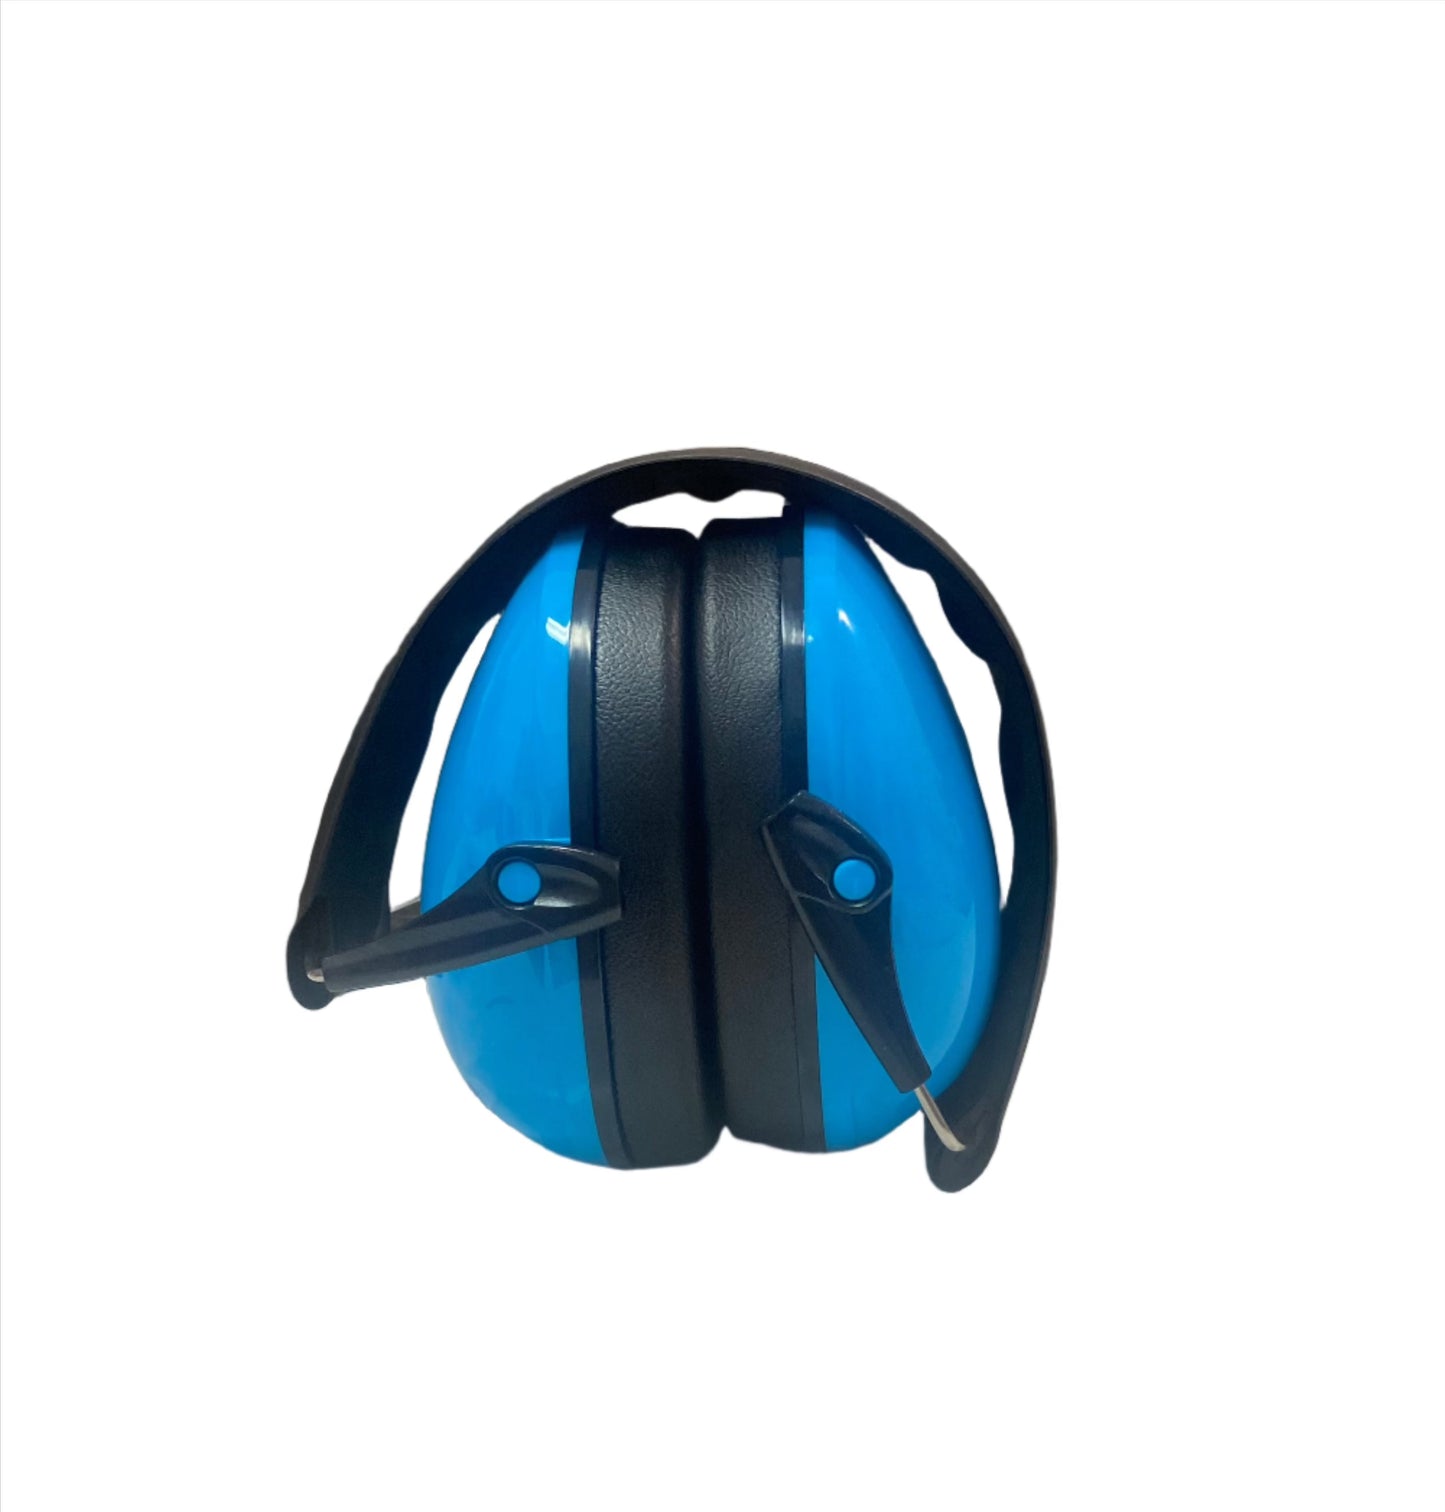 Compacted hearing protection earmuffs